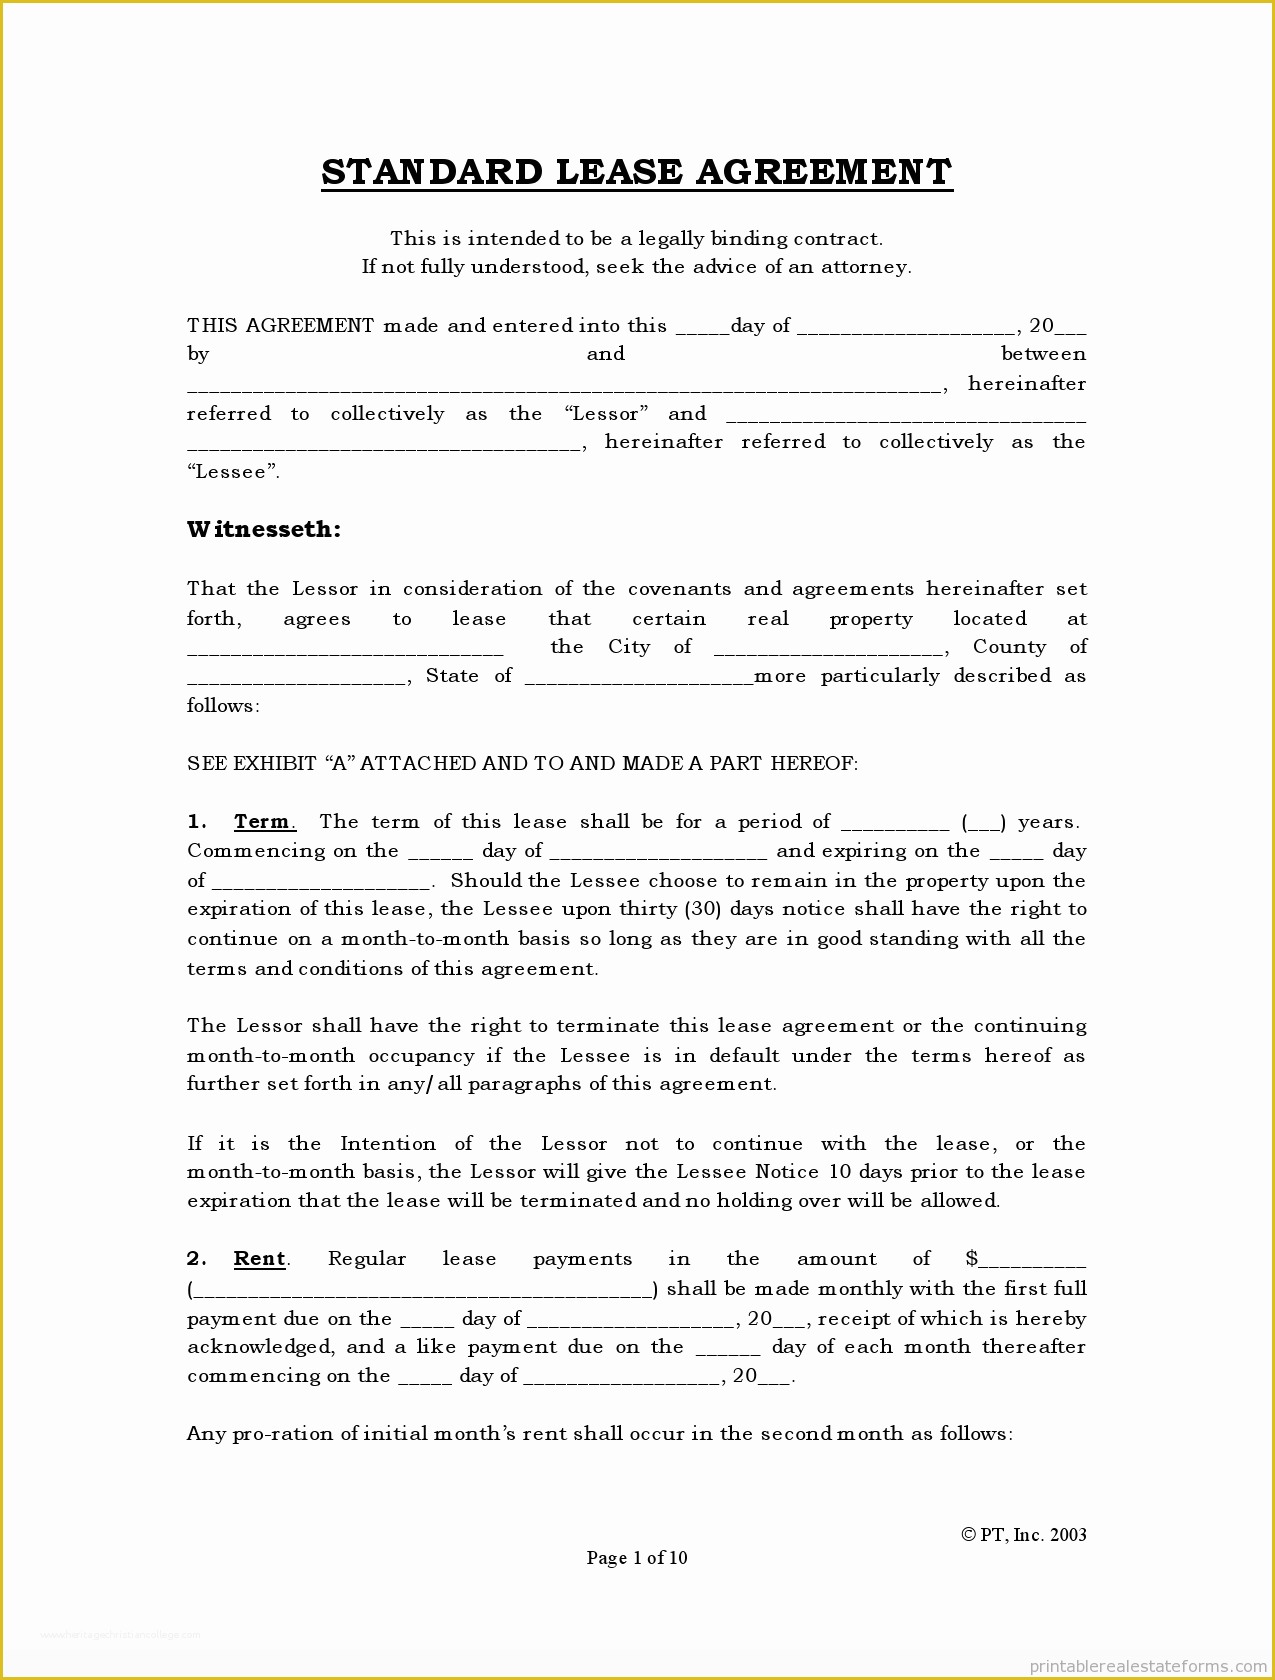 Free Lease Purchase Agreement Template Of Free Rental Agreements to Print